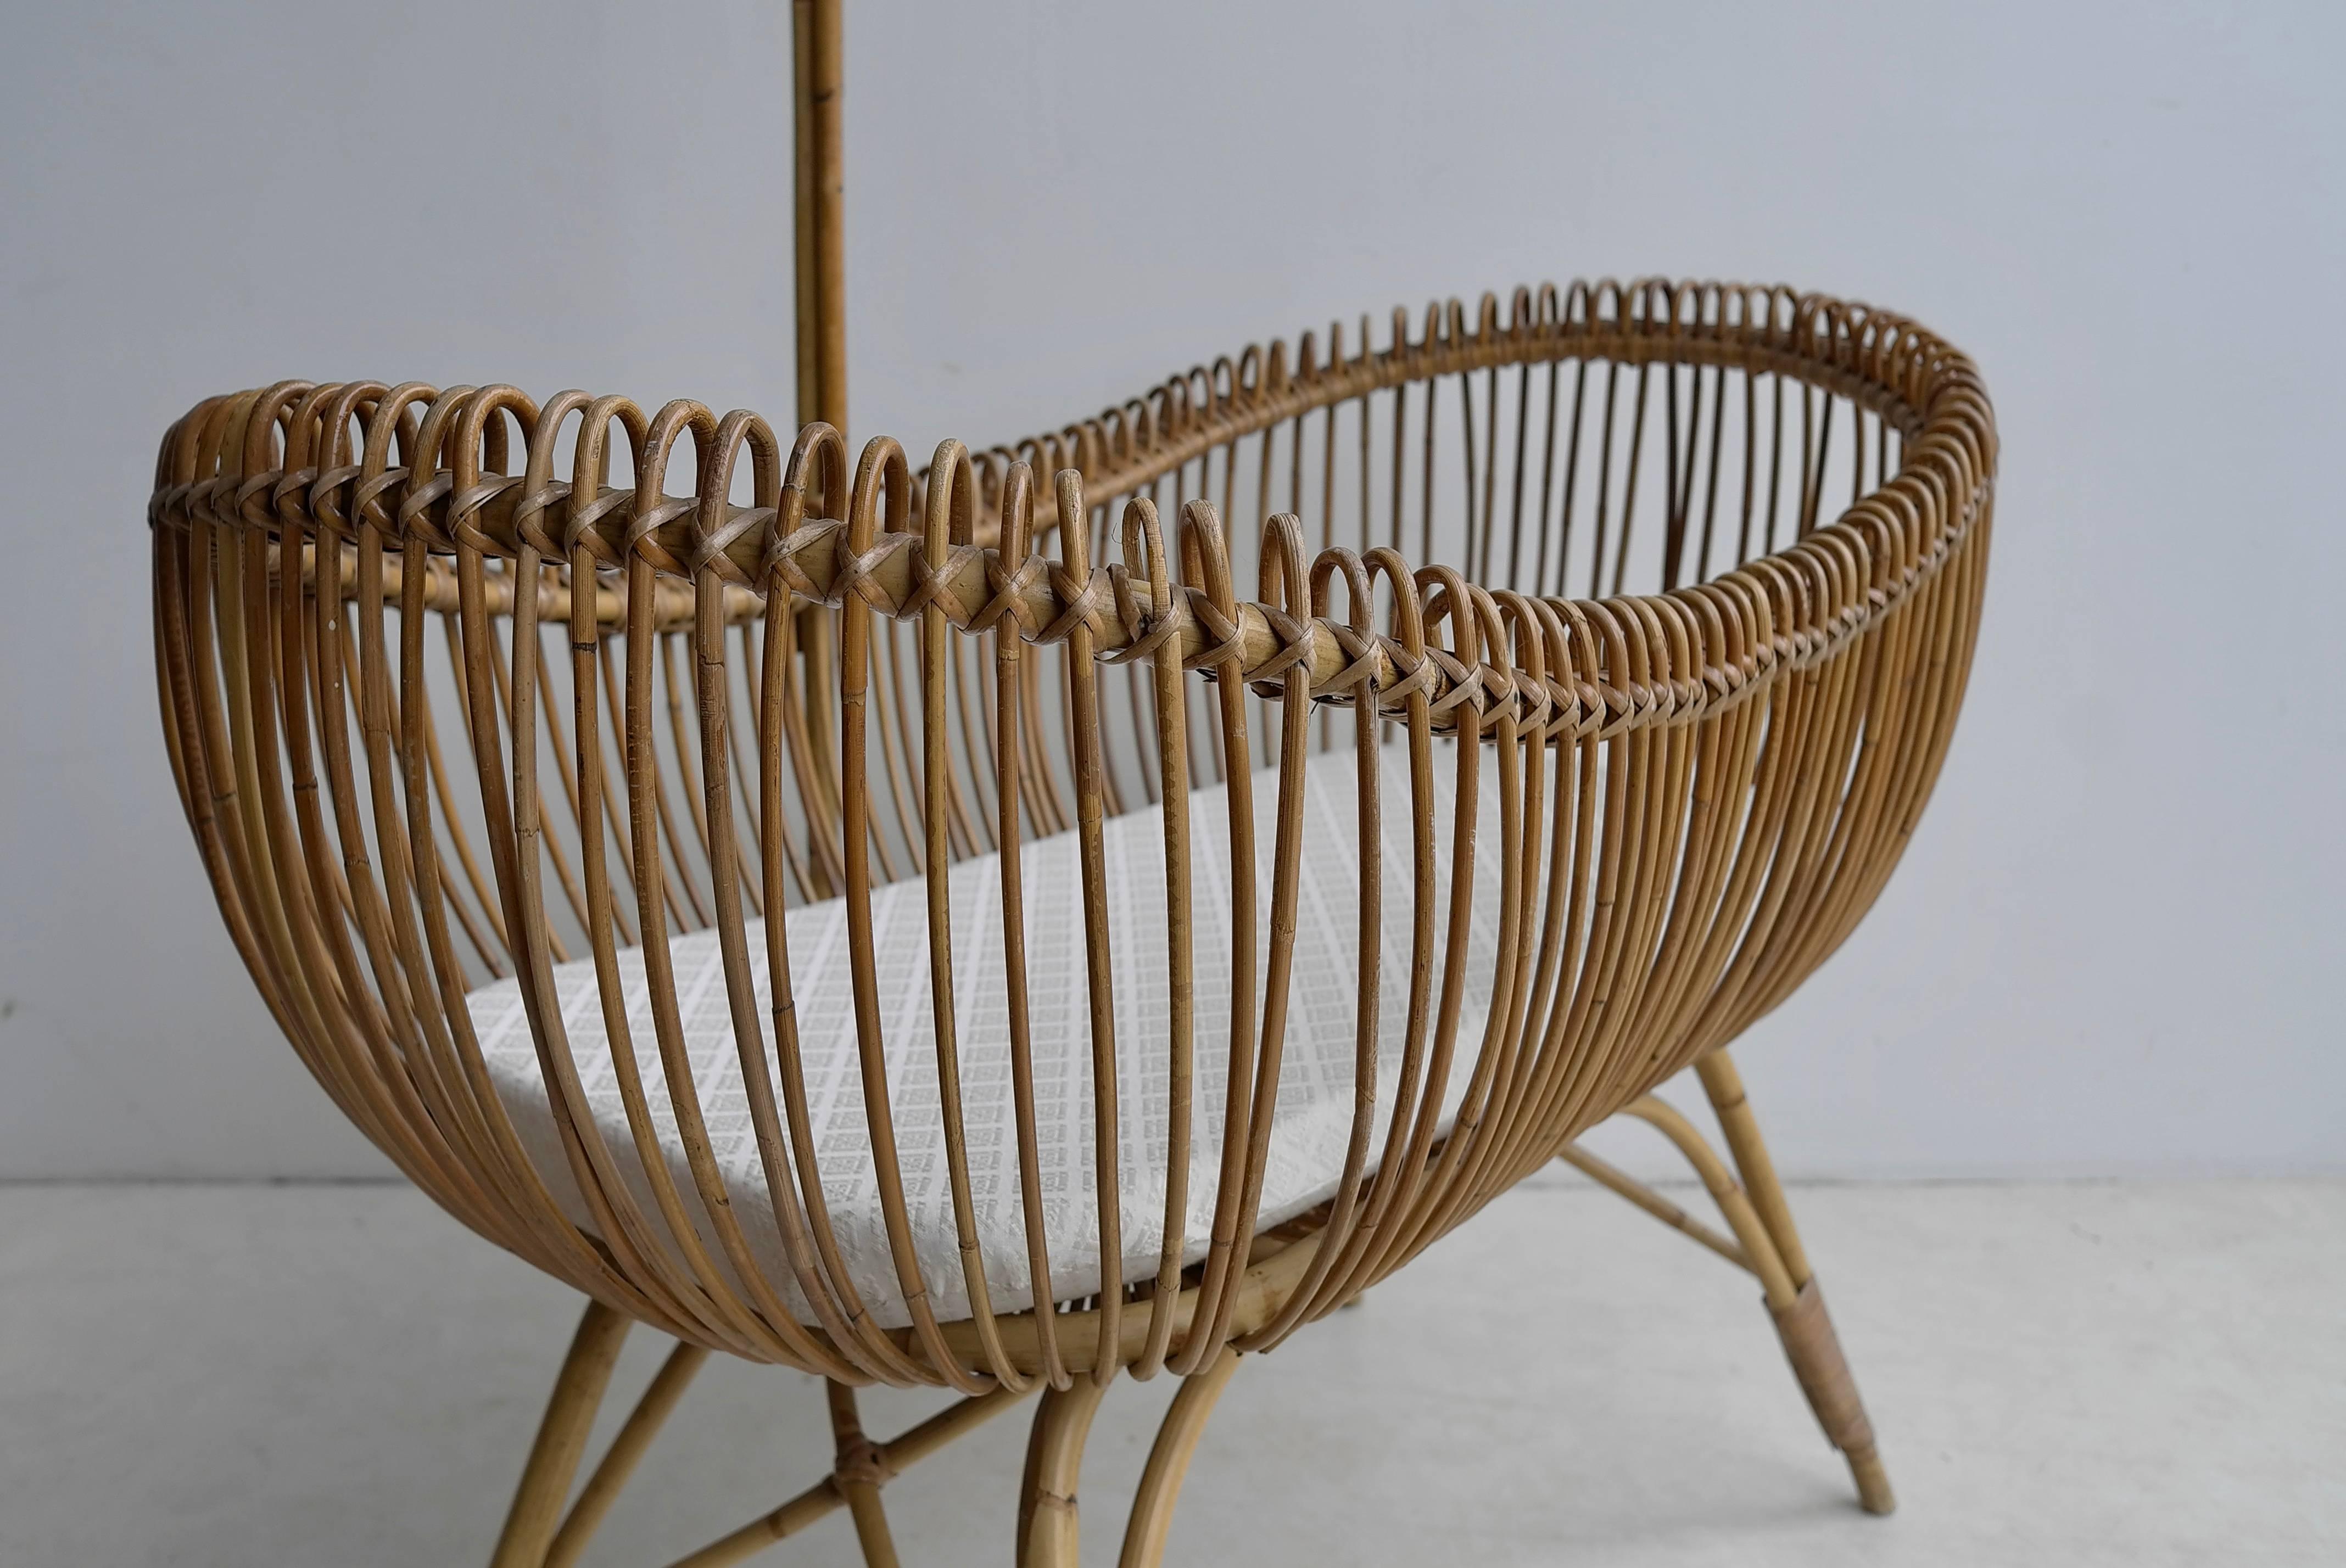 the bamboo cradle